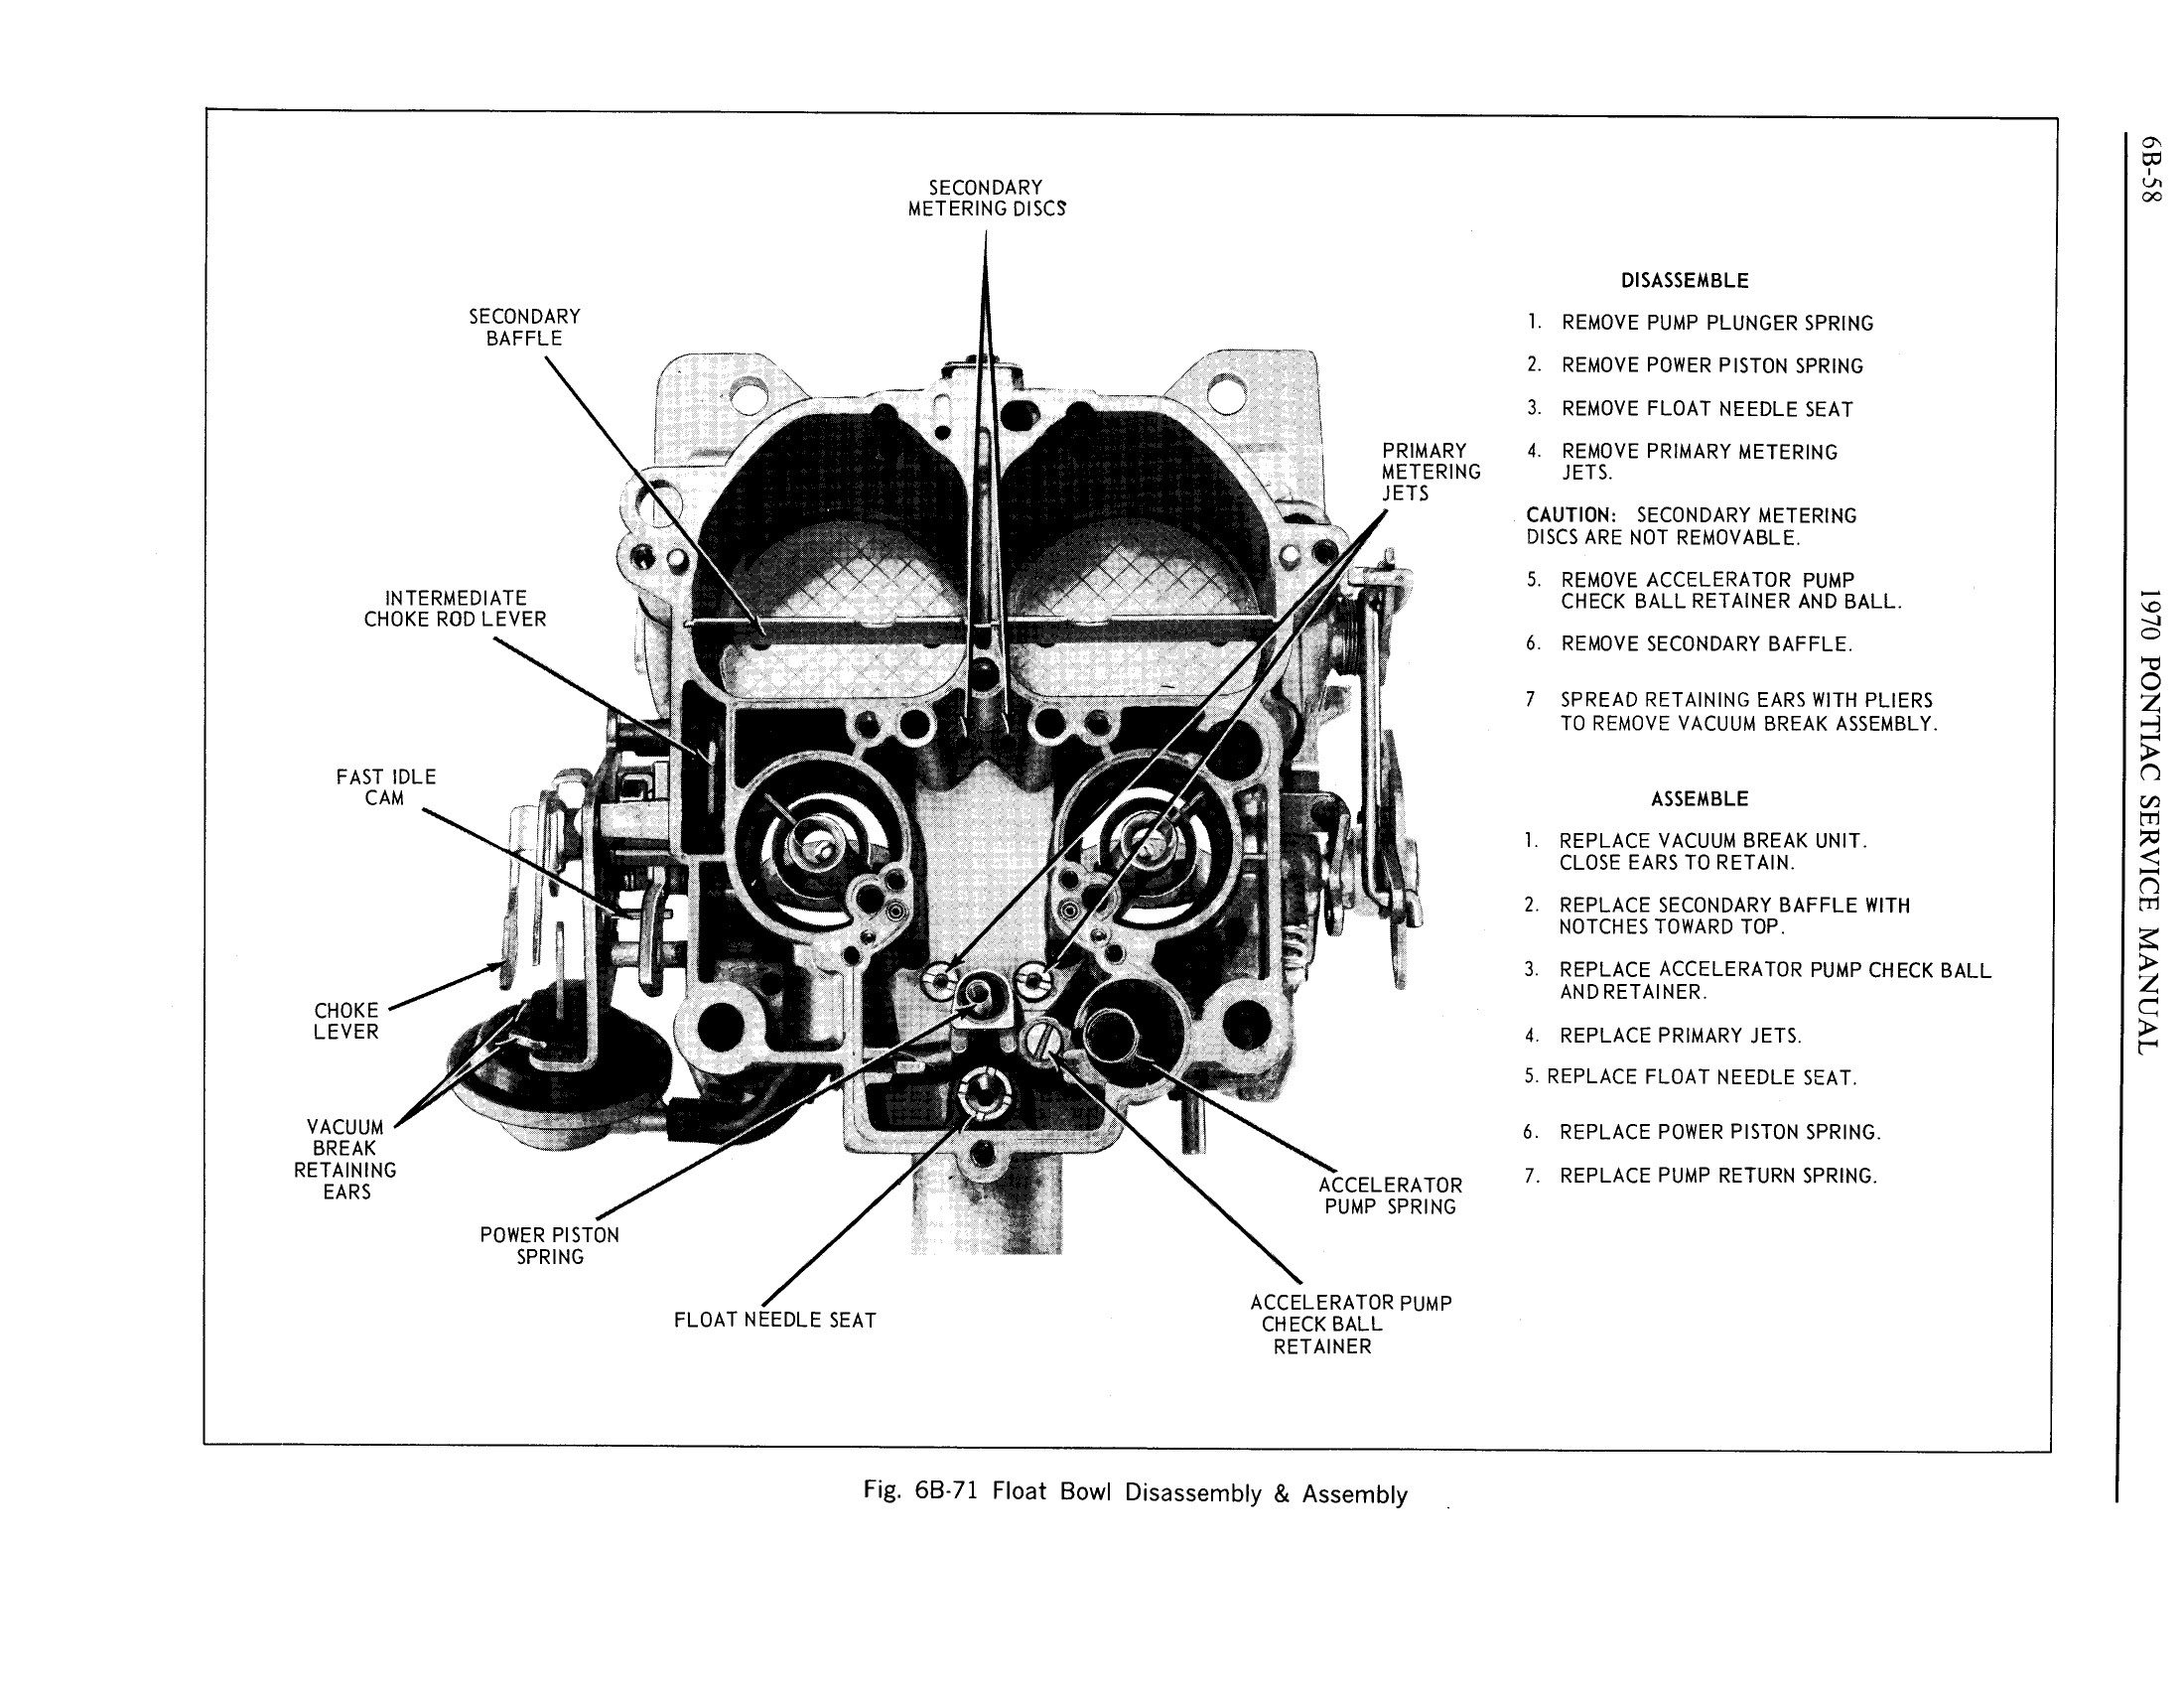 1970 Pontiac Chassis Service Manual - Engine Fuel Page 58 of 65